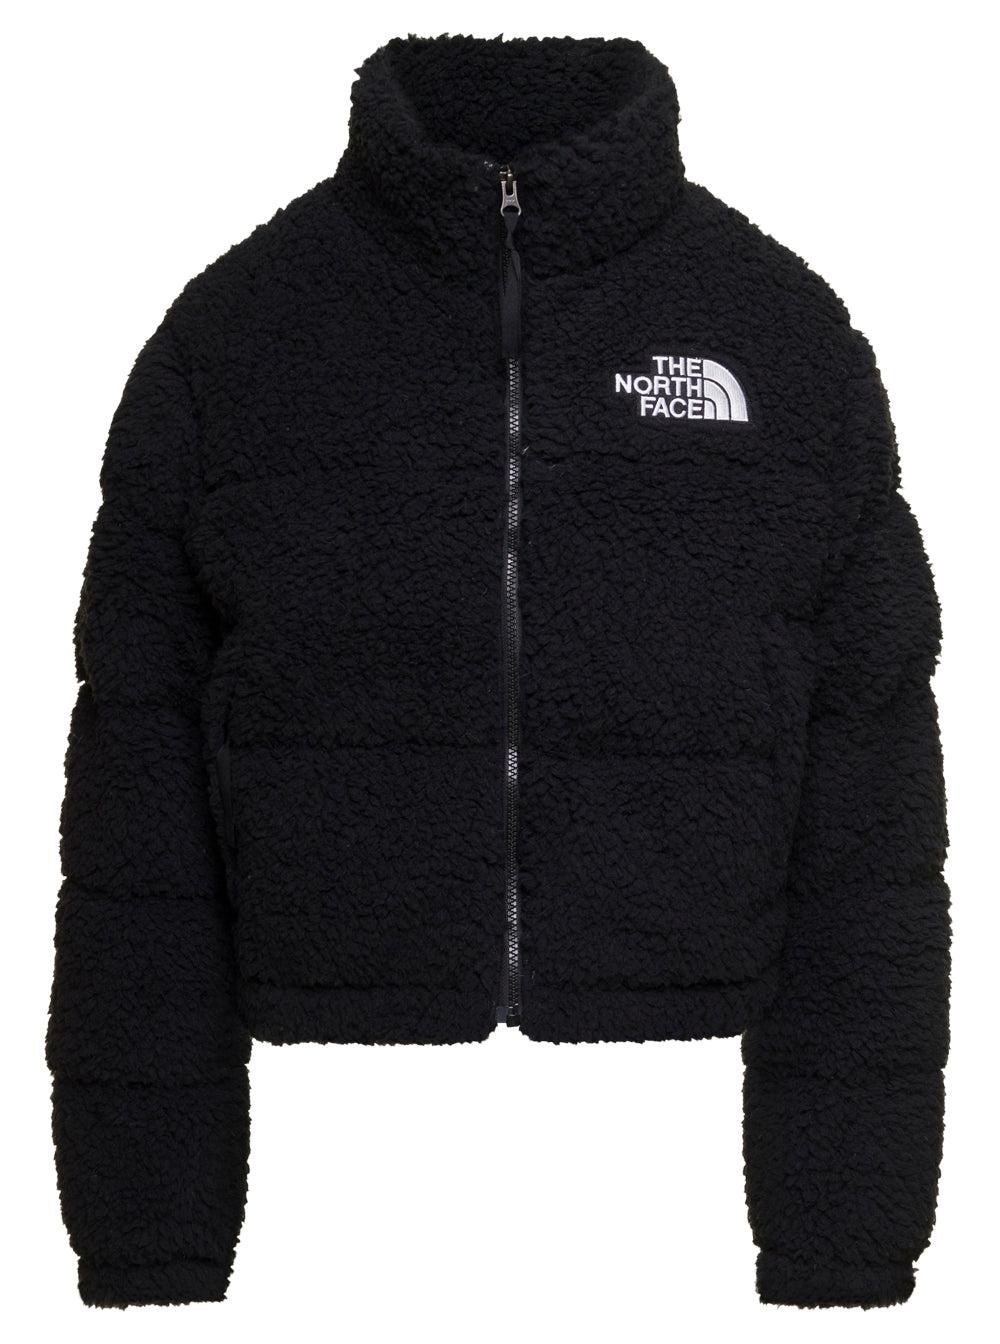 The North Face 'nuptse' Short Black Hgh Pile Jacket With Contrasting ...